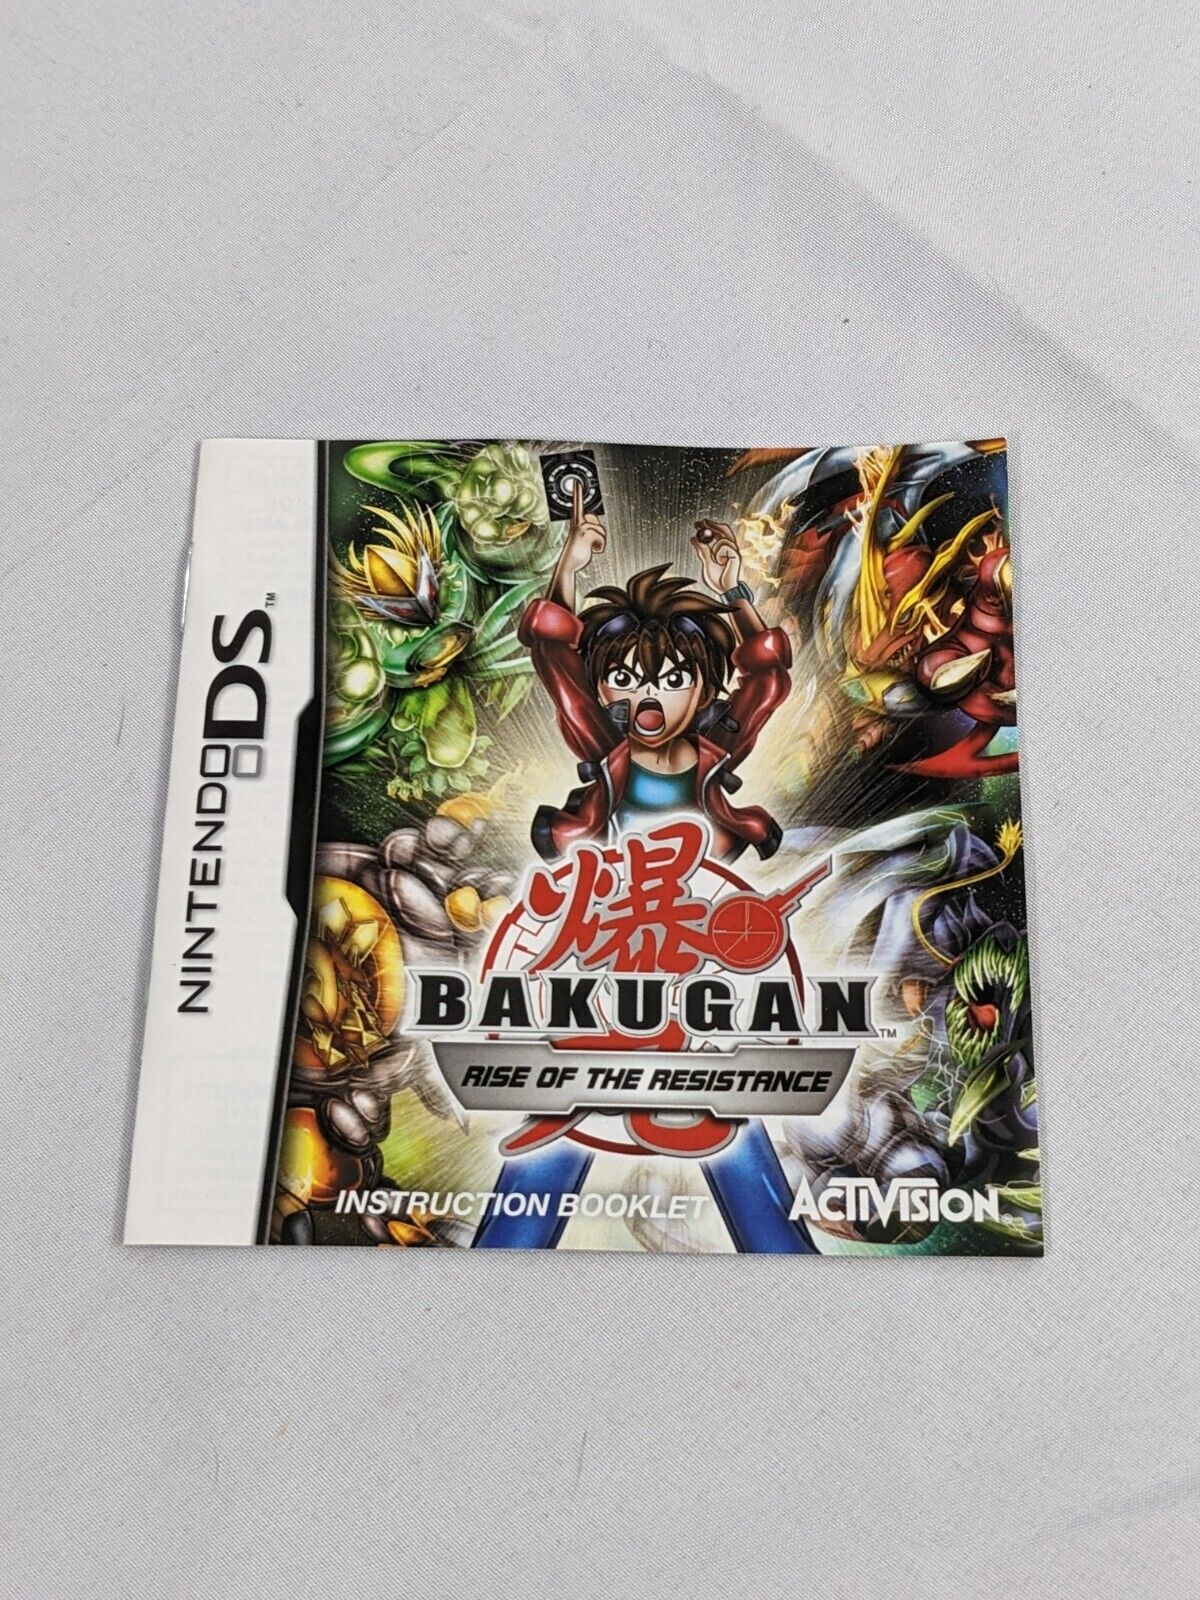 Nintendo DS Bakugan Rise of the Resistance Game Manual INSTRUCTION BOOKLET ONLY